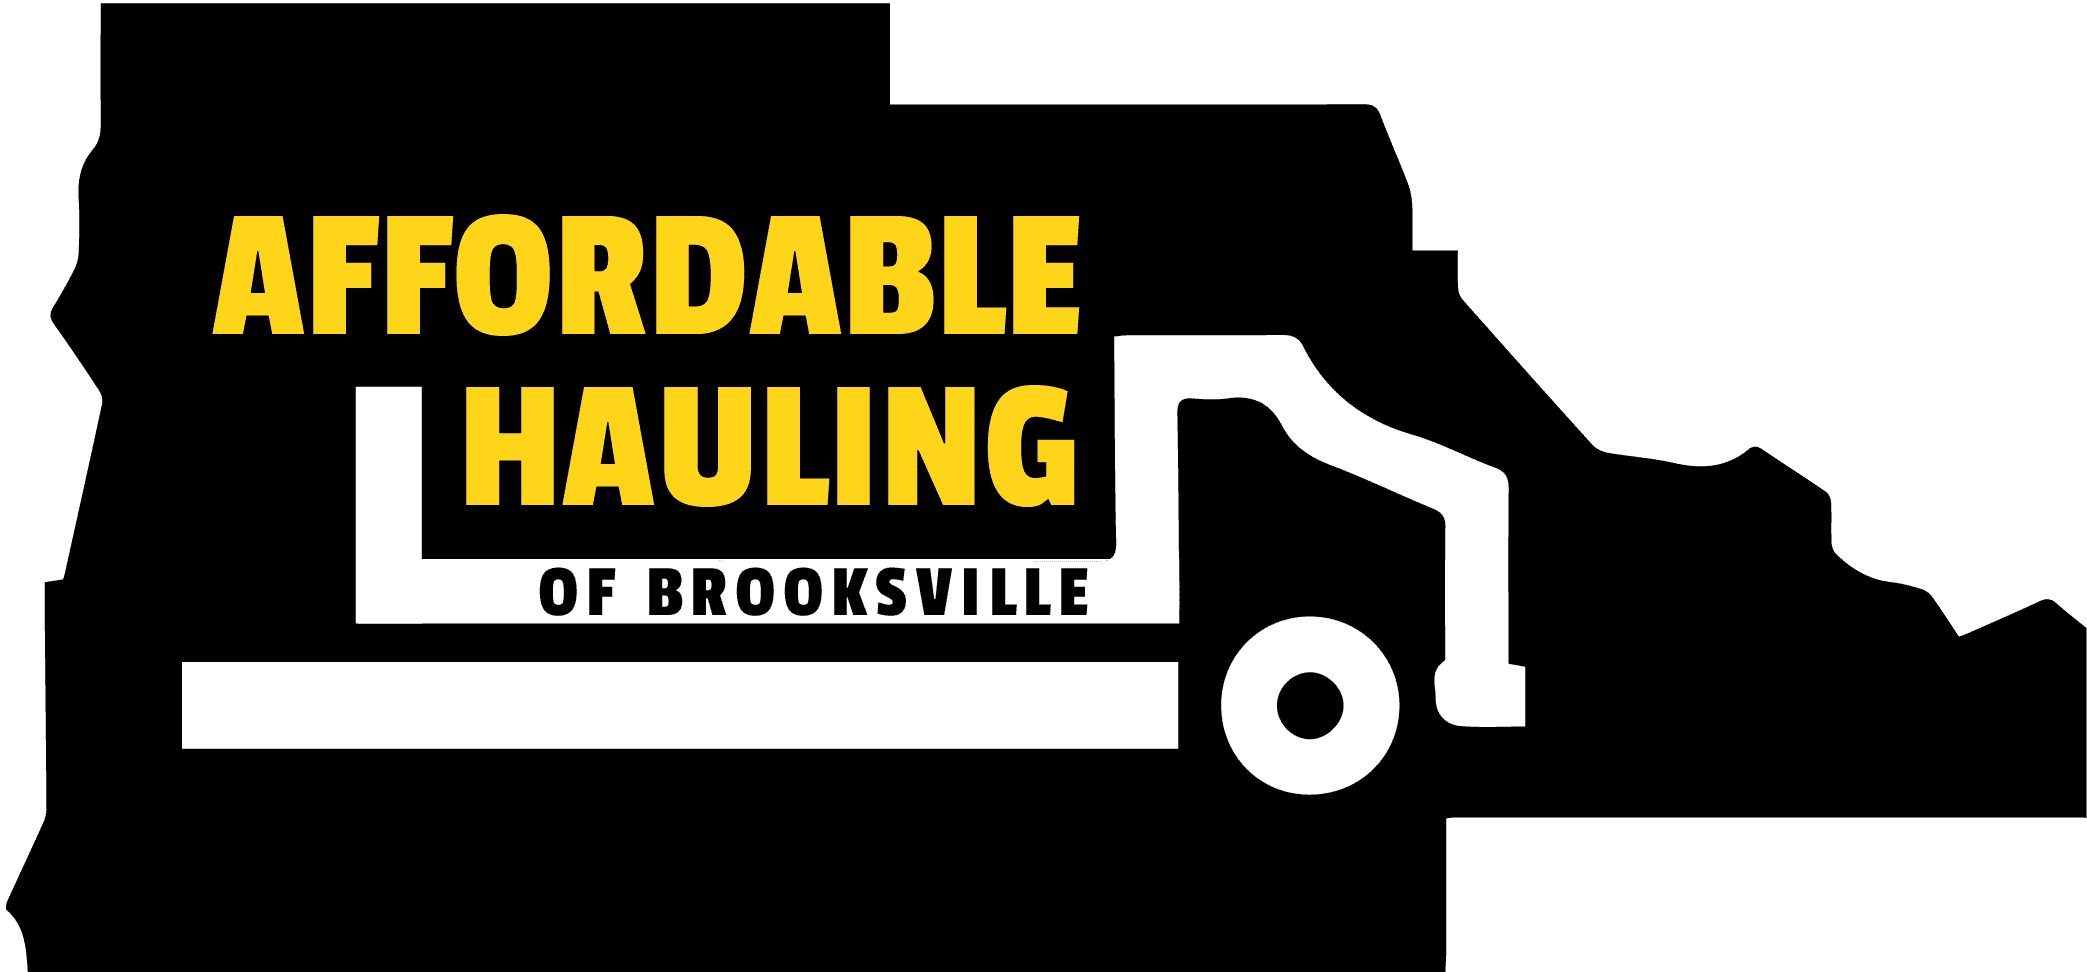 Affordable Hauling of Brooksville